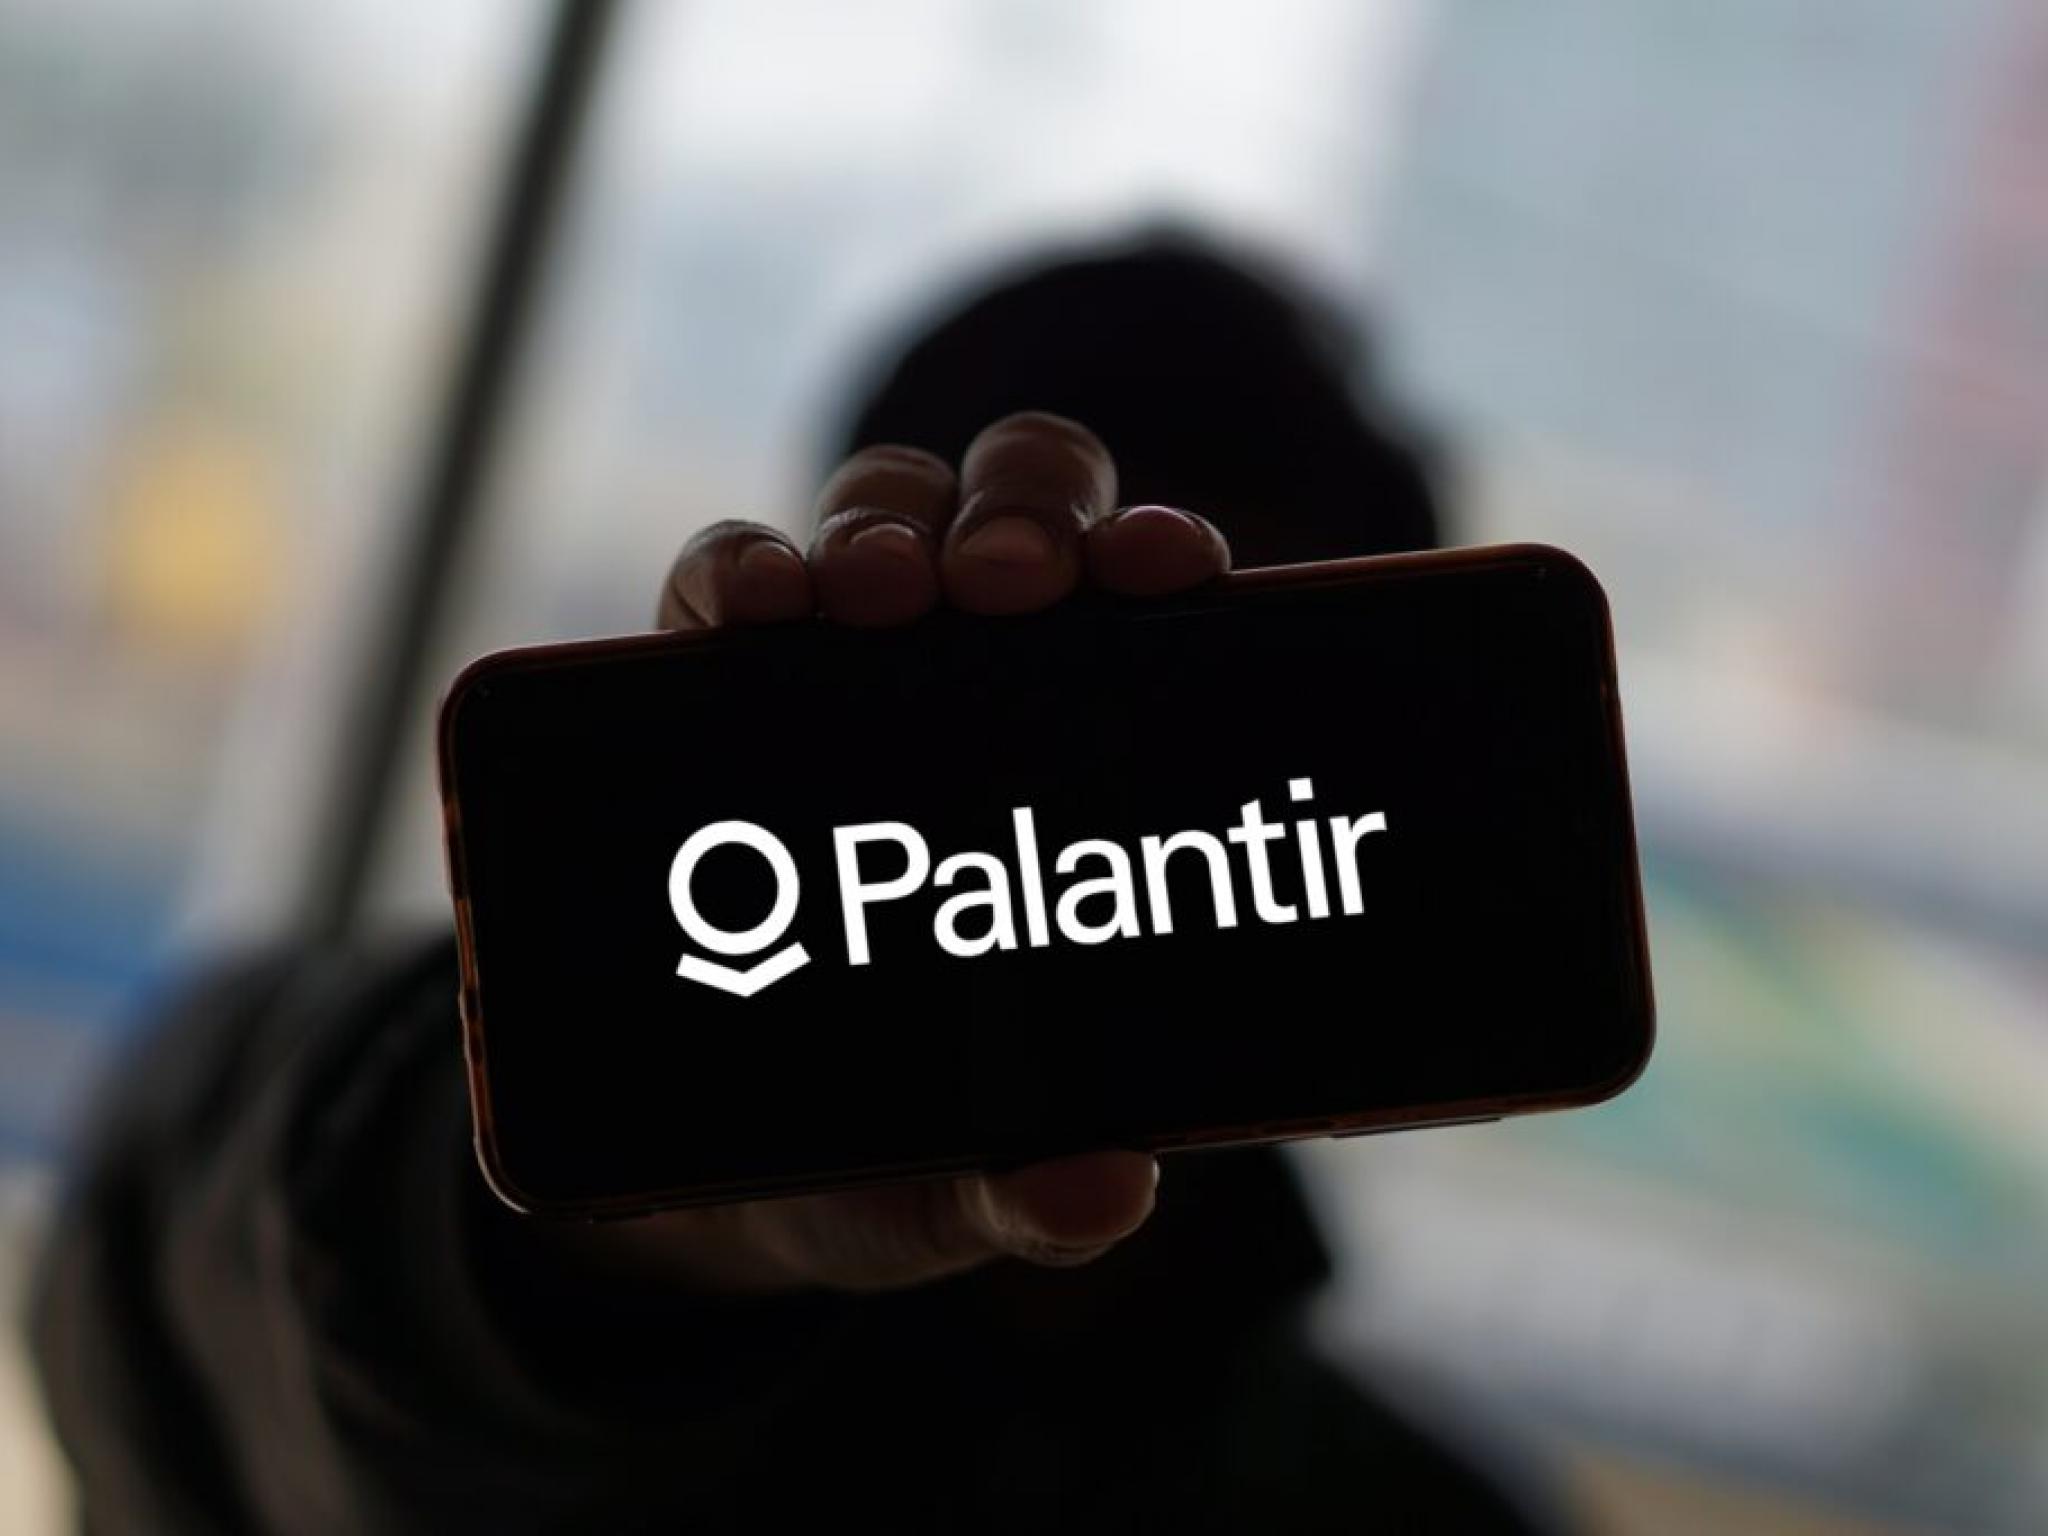  palantir-and-meta-are-two-must-have-ai-stock-picks-for-year-ahead--investor-says 